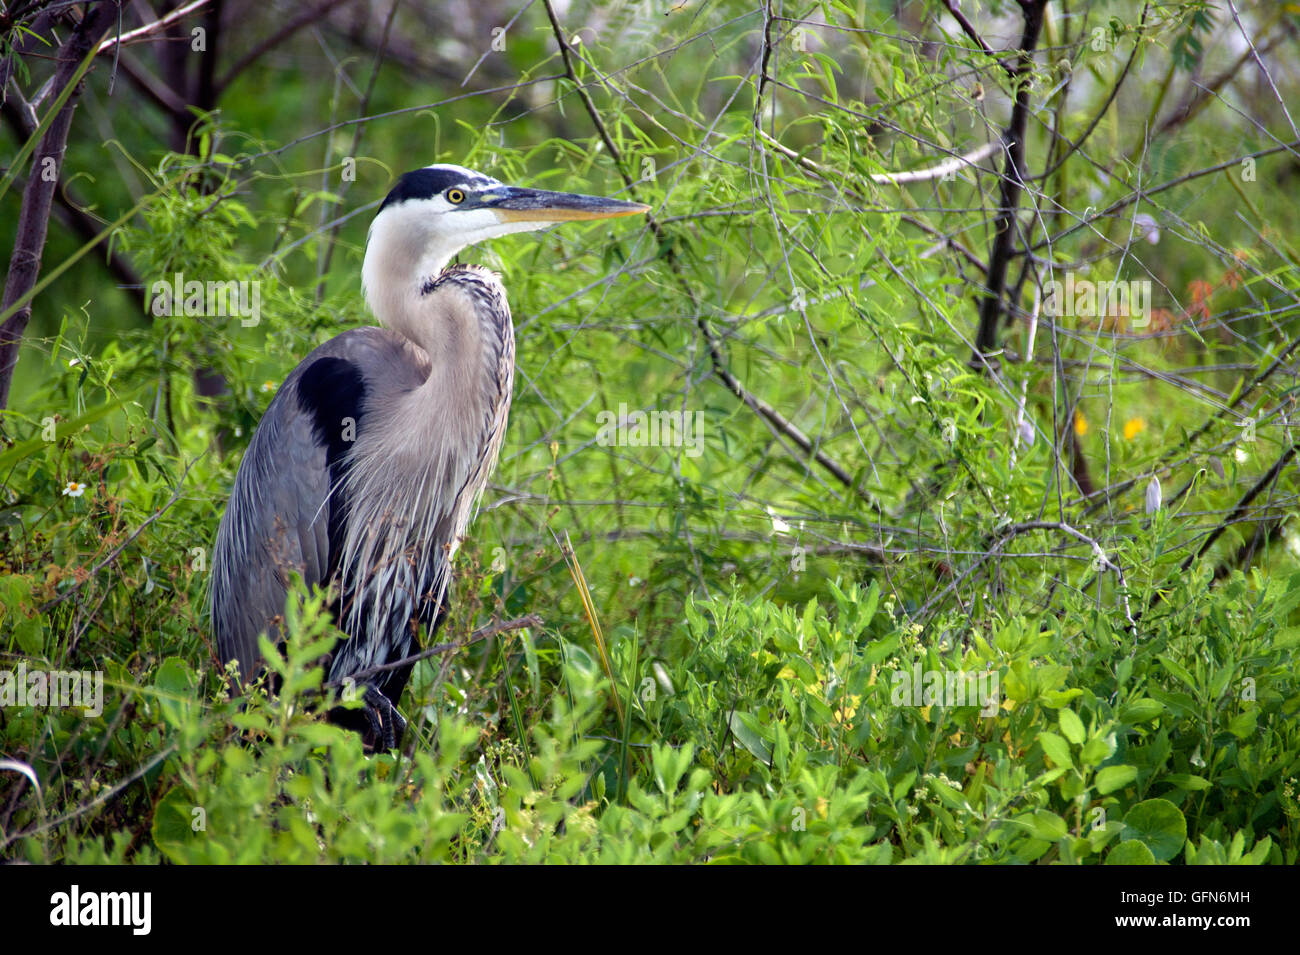 A heron resting in vegetation by a beach. Stock Photo